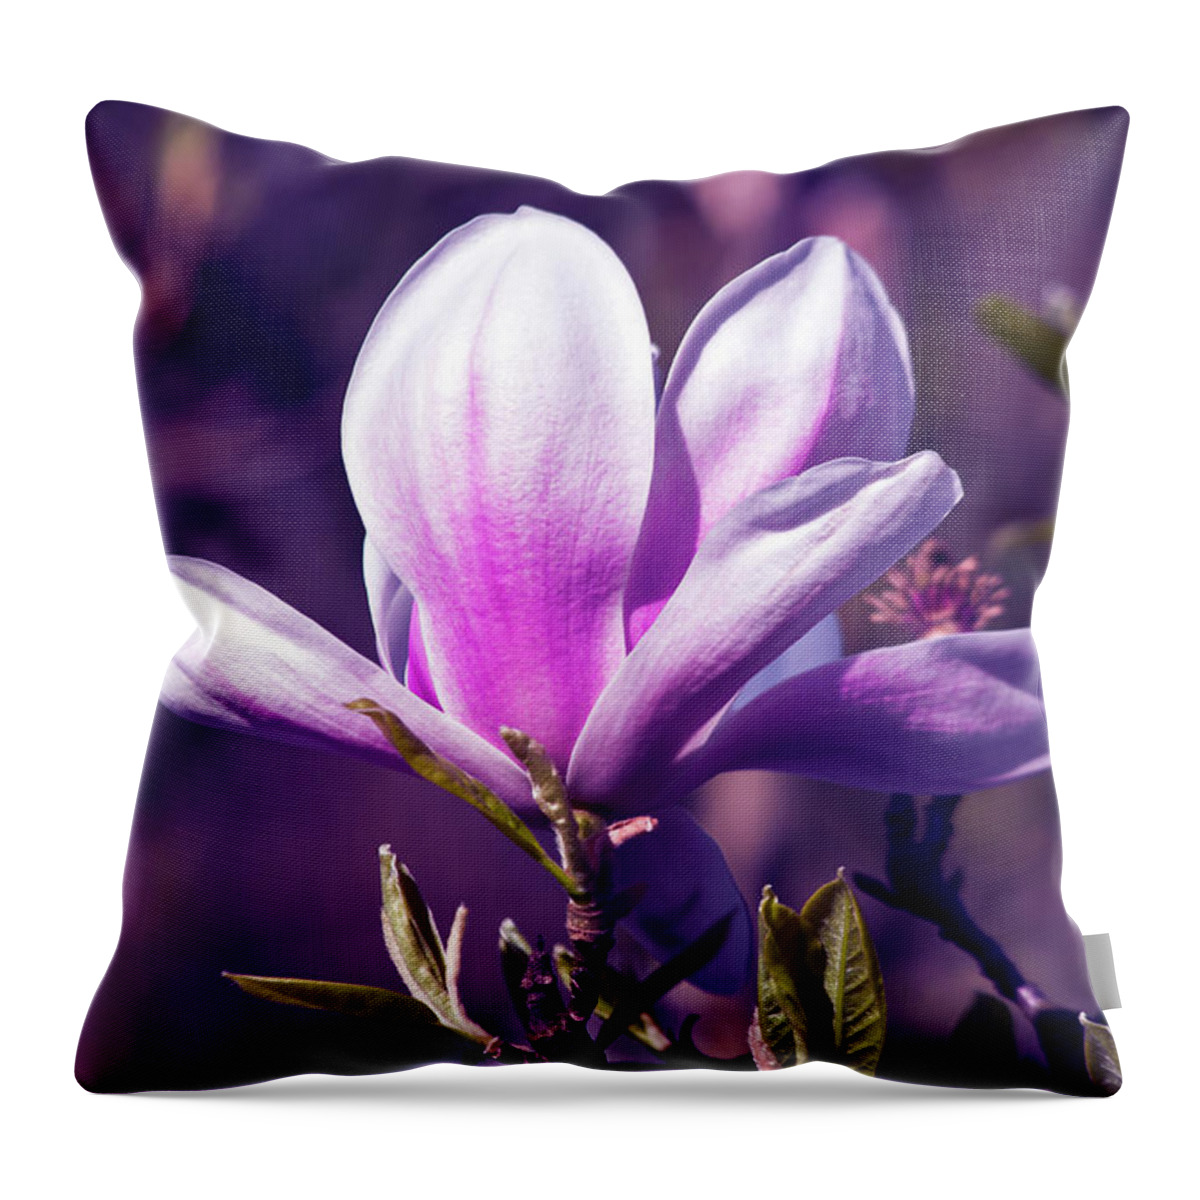 Ultra Violet Magnolia Throw Pillow featuring the photograph Ultra Violet Magnolia by Silva Wischeropp